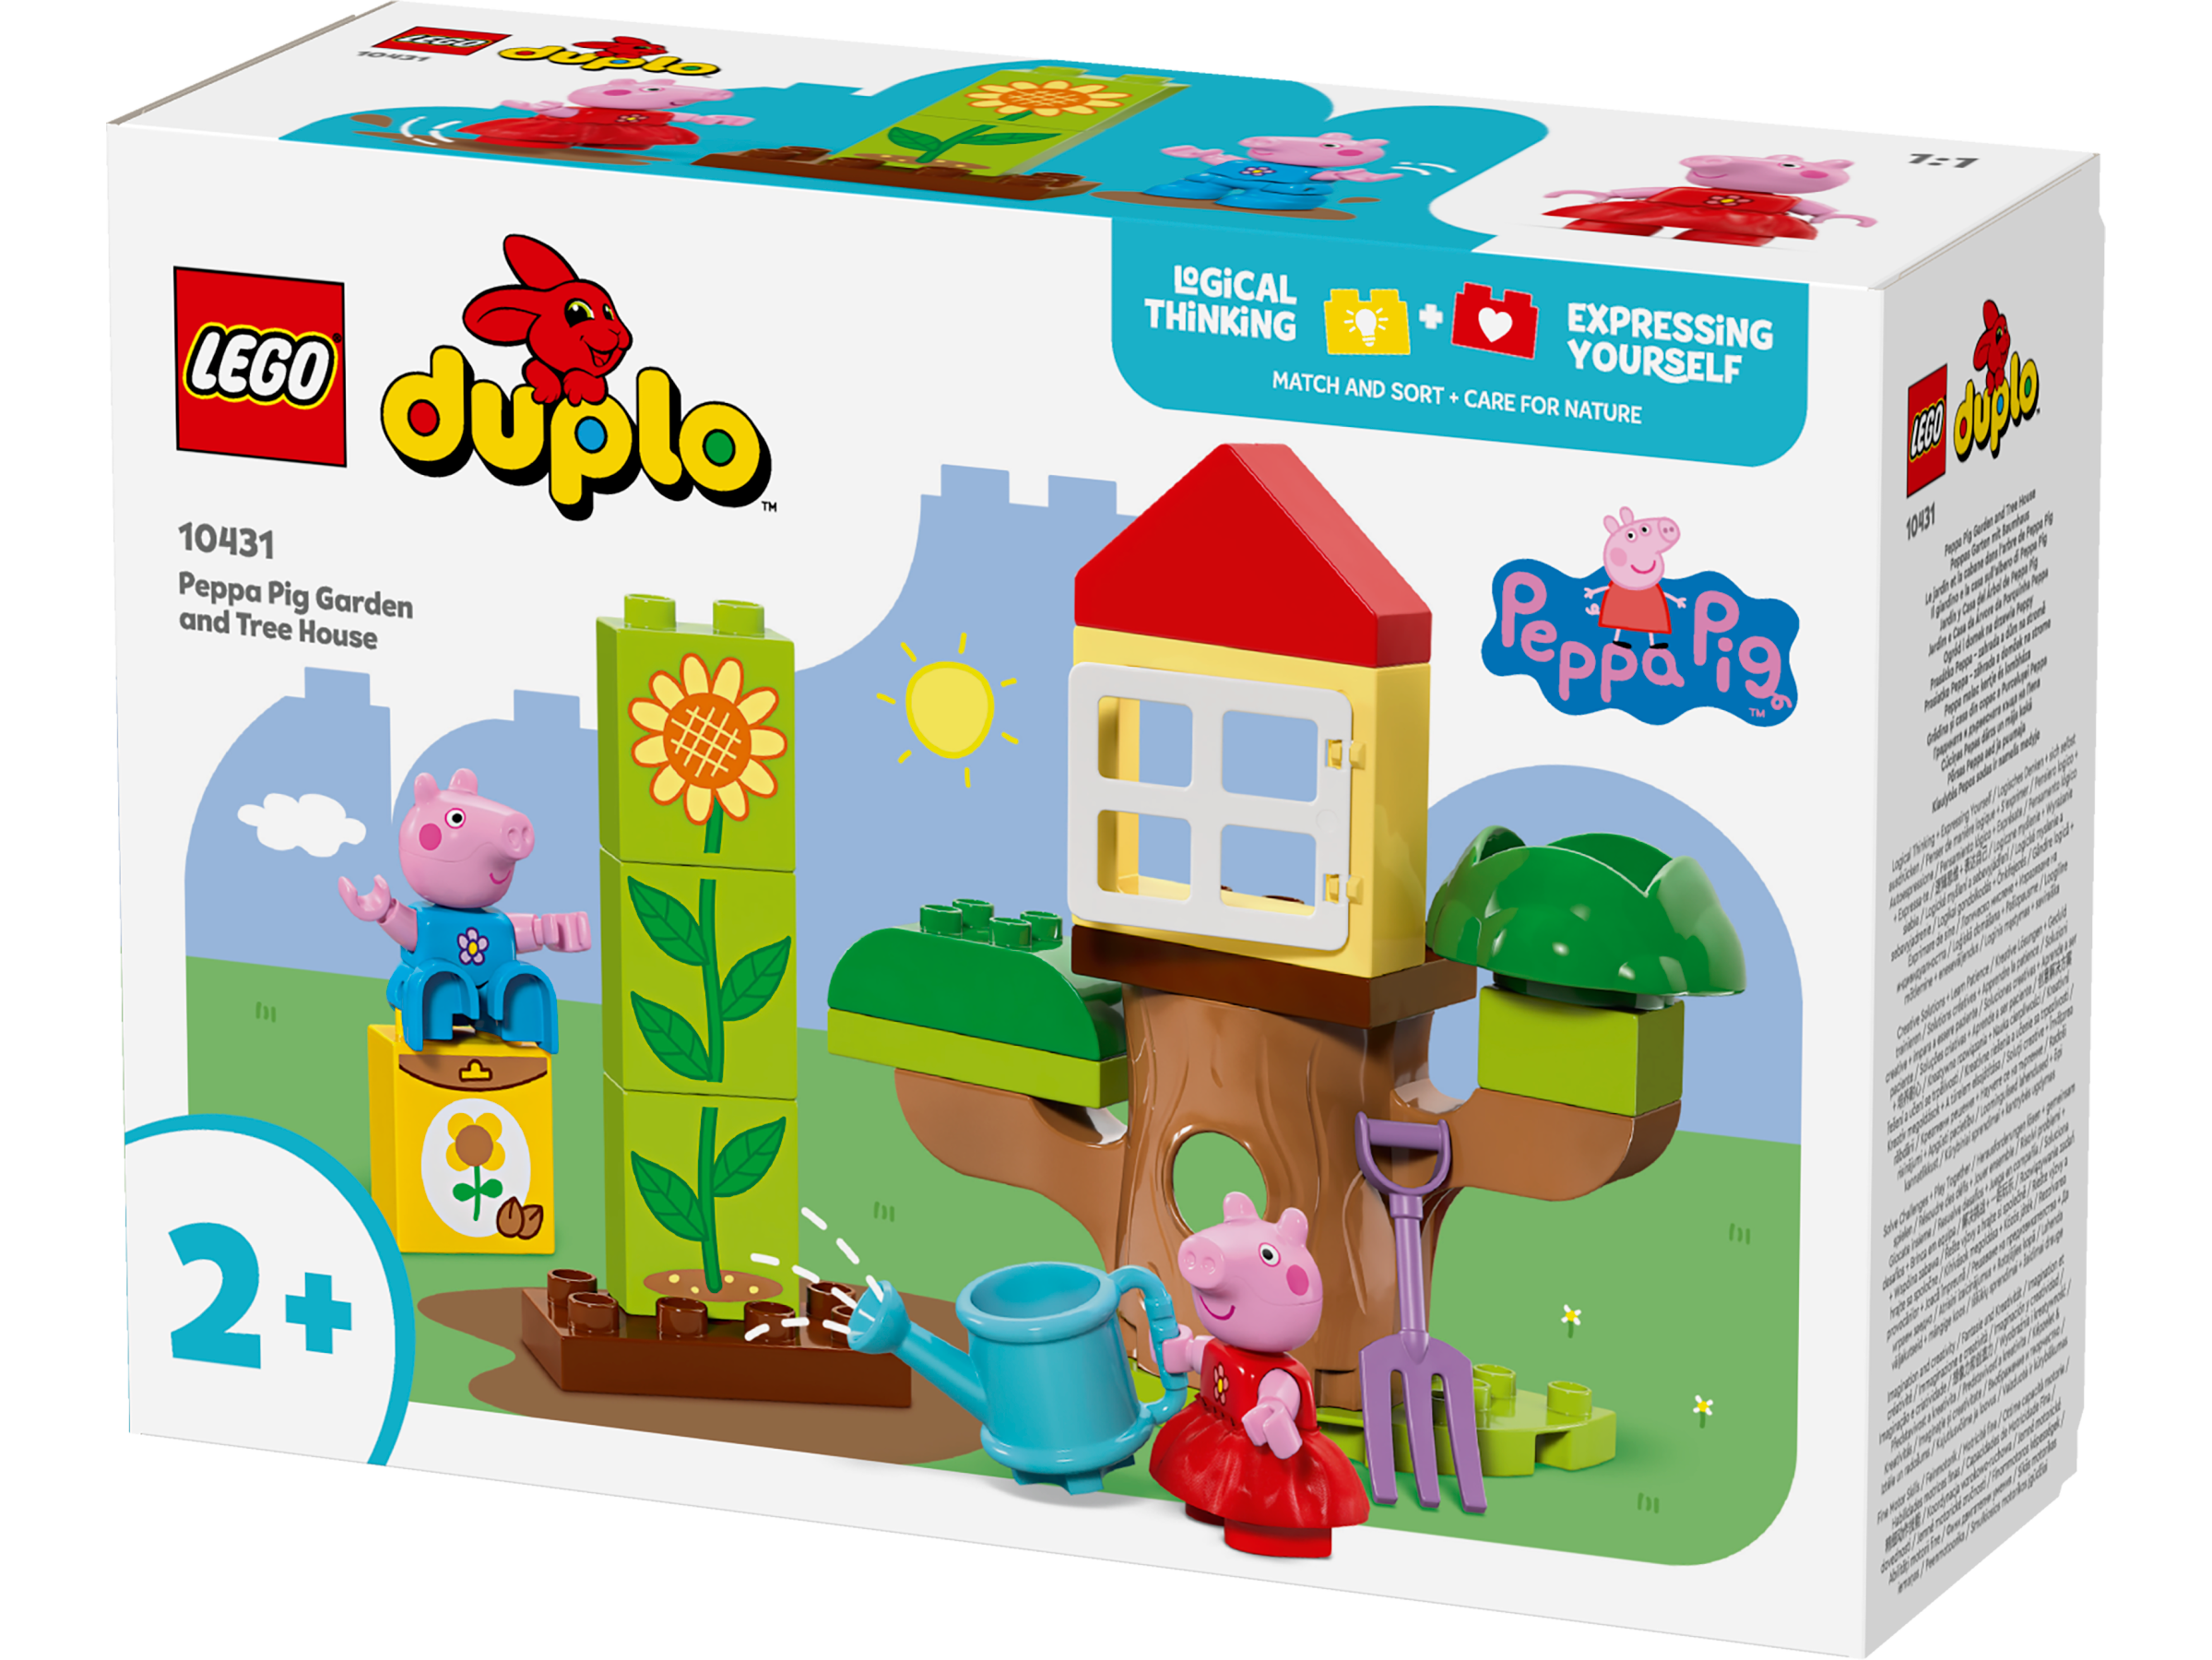 Lego 10431 Peppa Pig Garden and Tree House